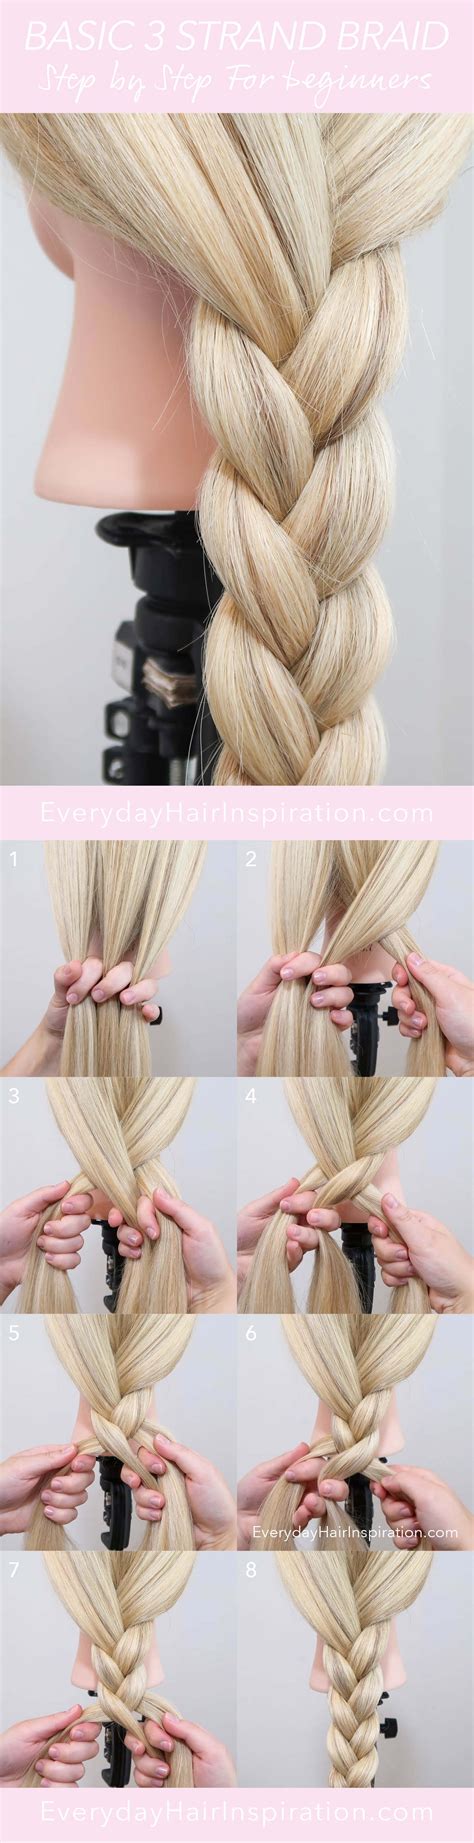 How to do pigtail twist?